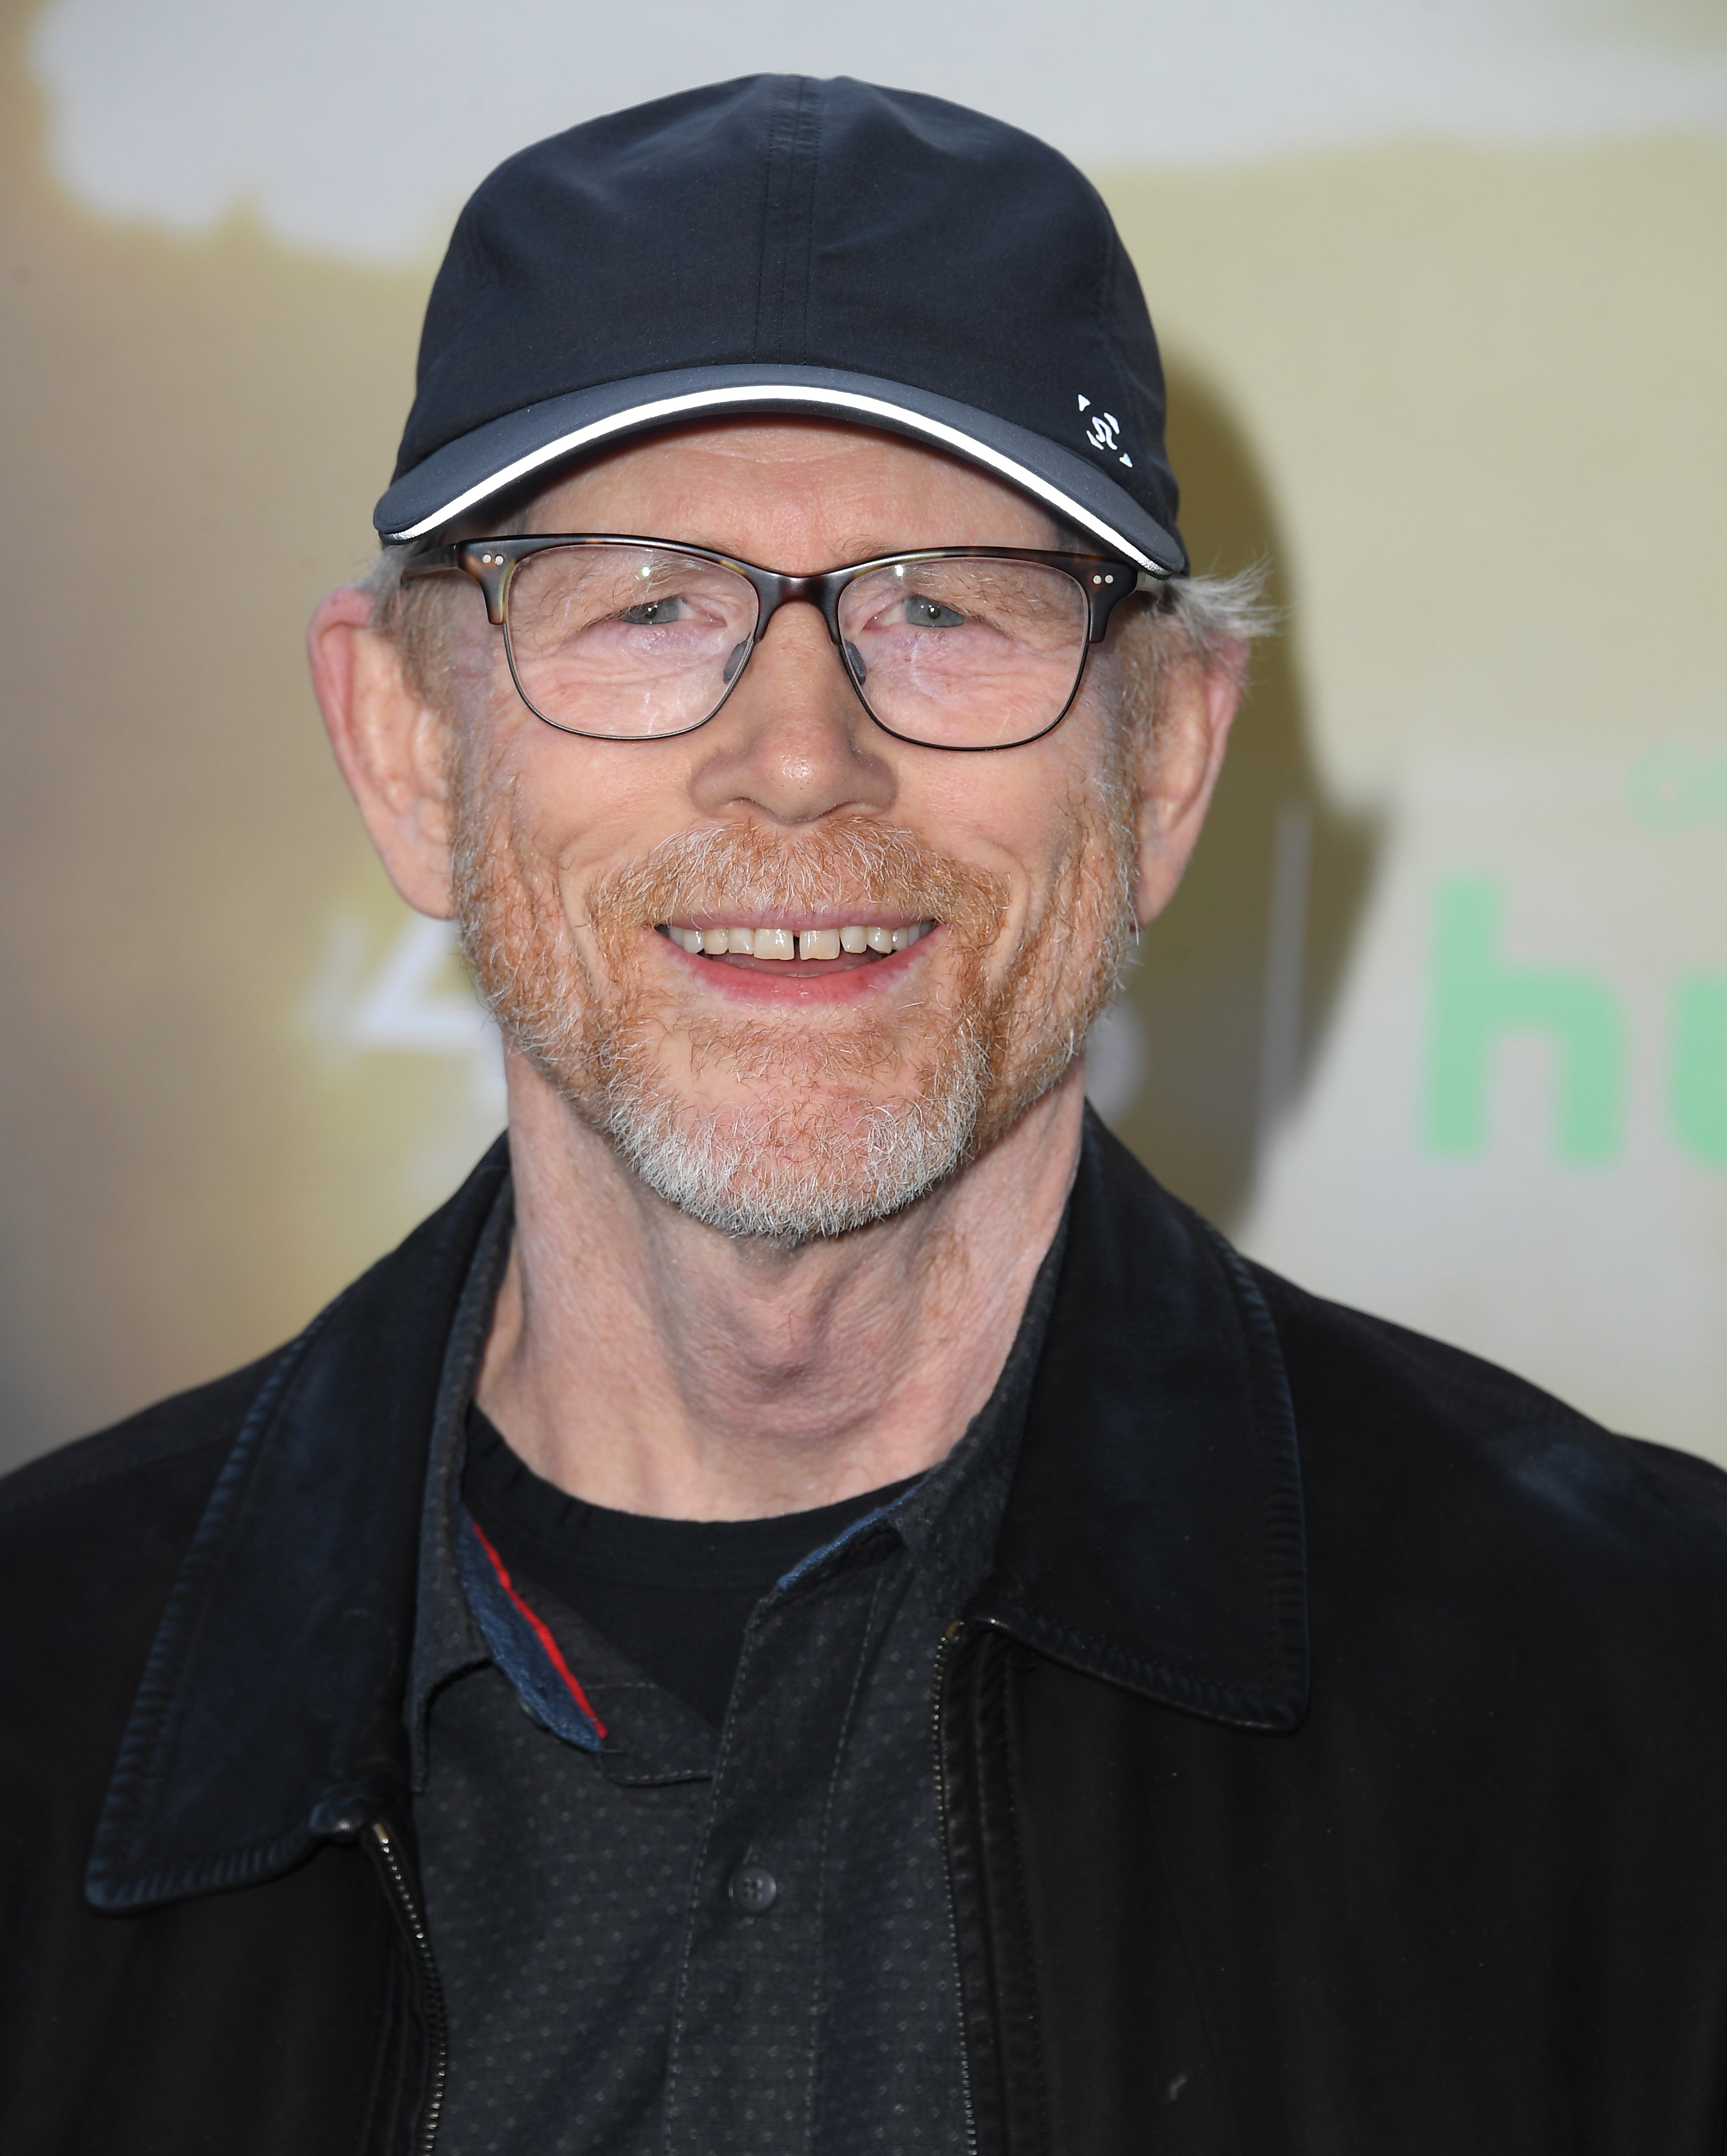 Ron Howard arrives at the Premiere Of FX's "Under The Banner Of Heaven" at Hollywood Athletic Club on April 20, 2022 in Hollywood, California.| Source: Getty Images